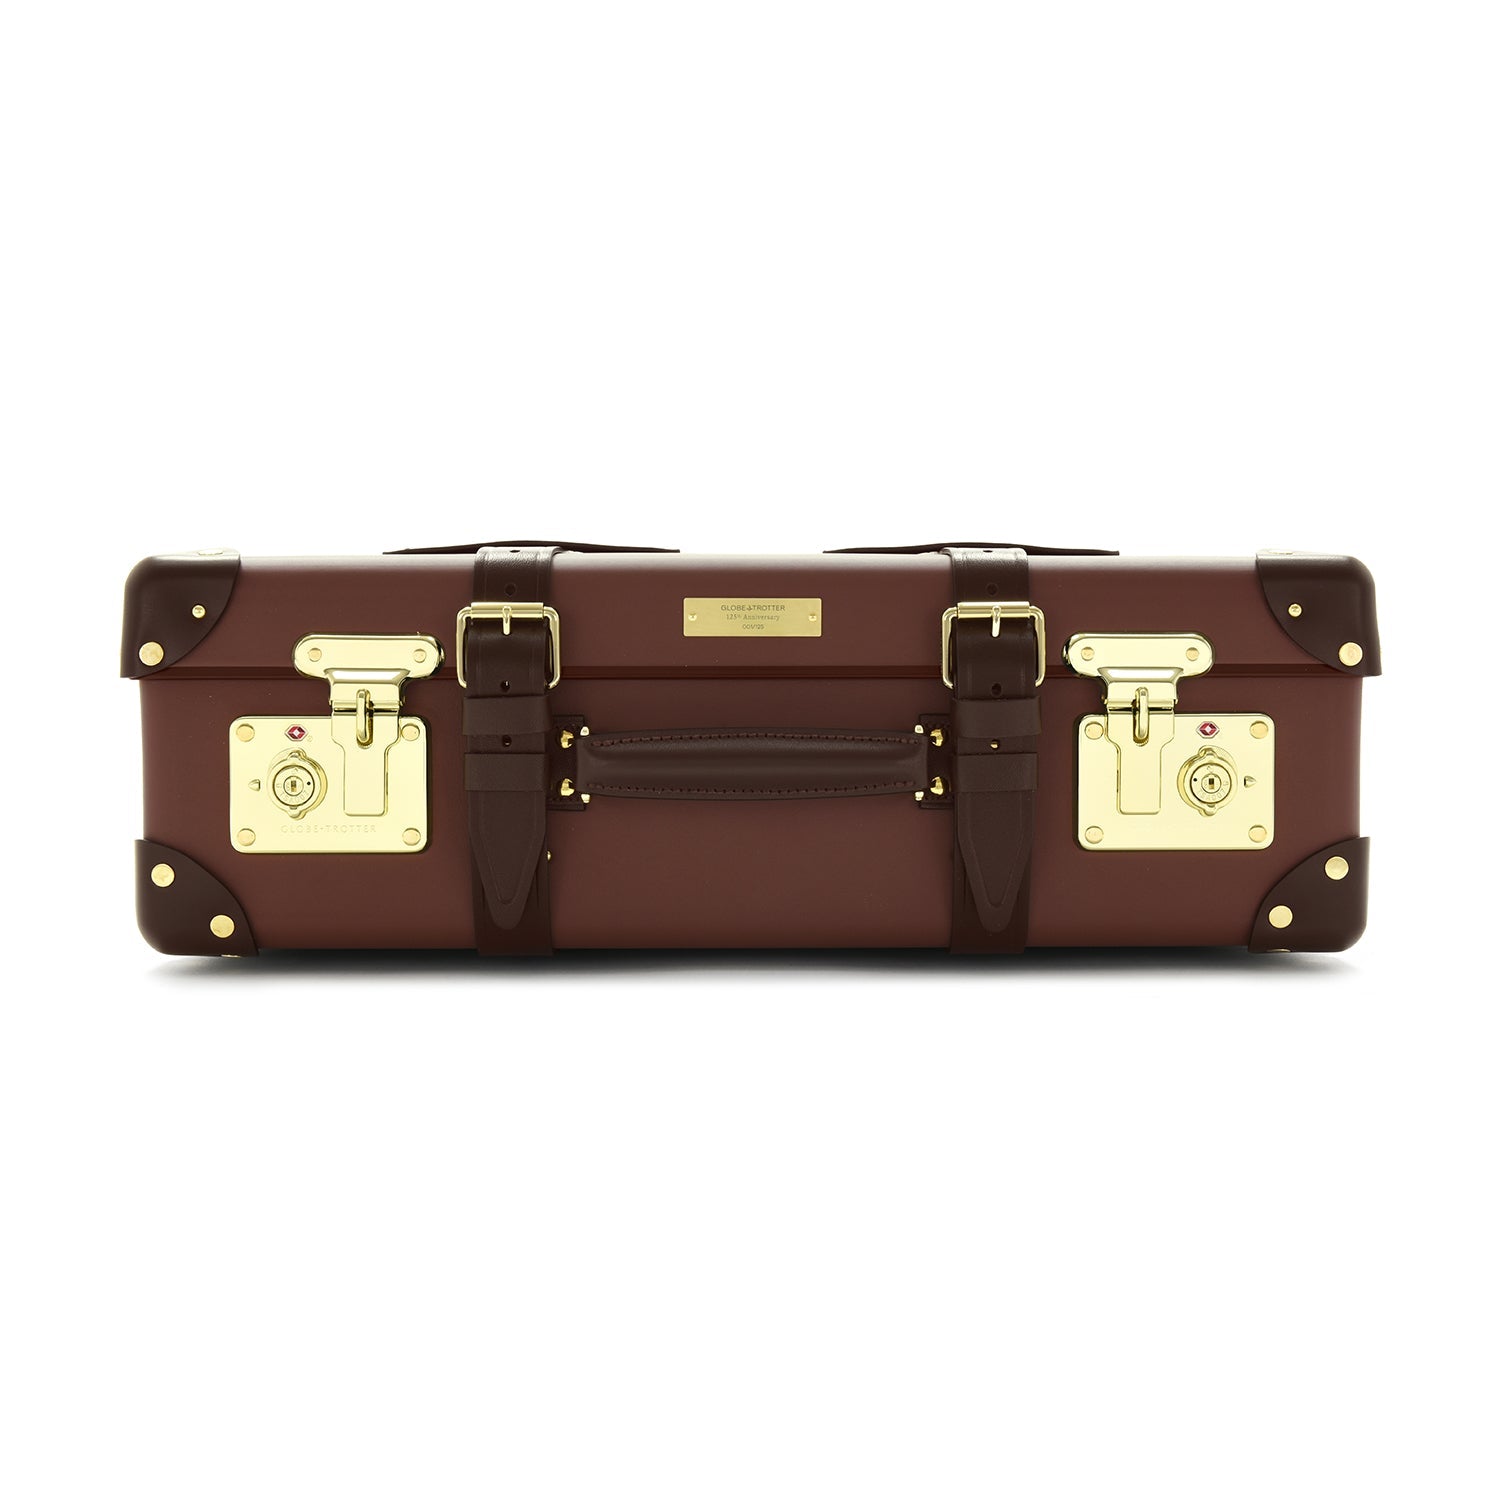 Centenary 125 · Carry-On Suitcase | Heritage Brown/Chocolate - GLOBE-TROTTER